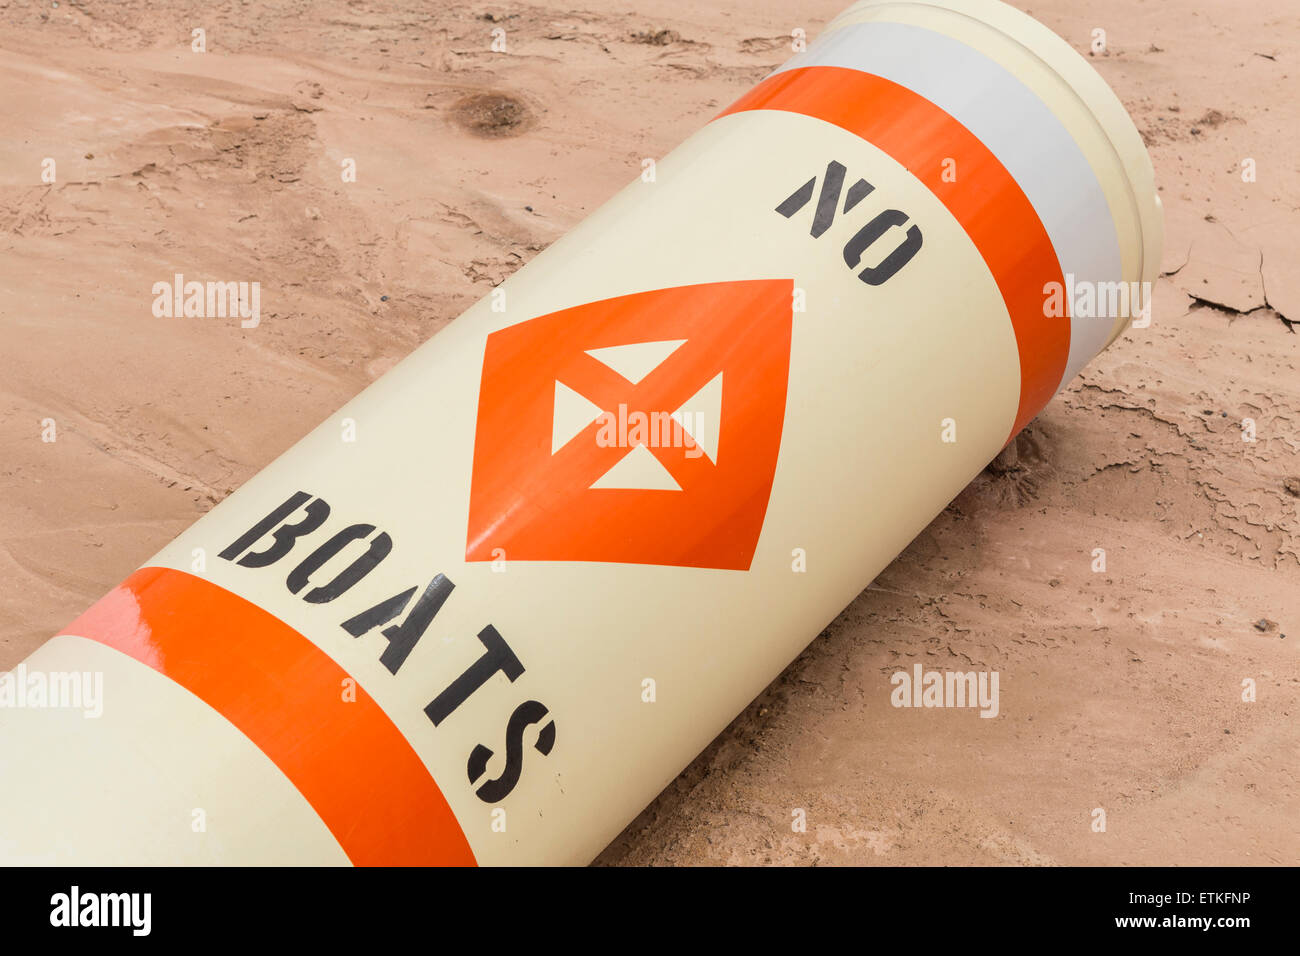 No boats buoy laying on silt mud at drought damaged Lake Mead in Southern Nevada. Stock Photo